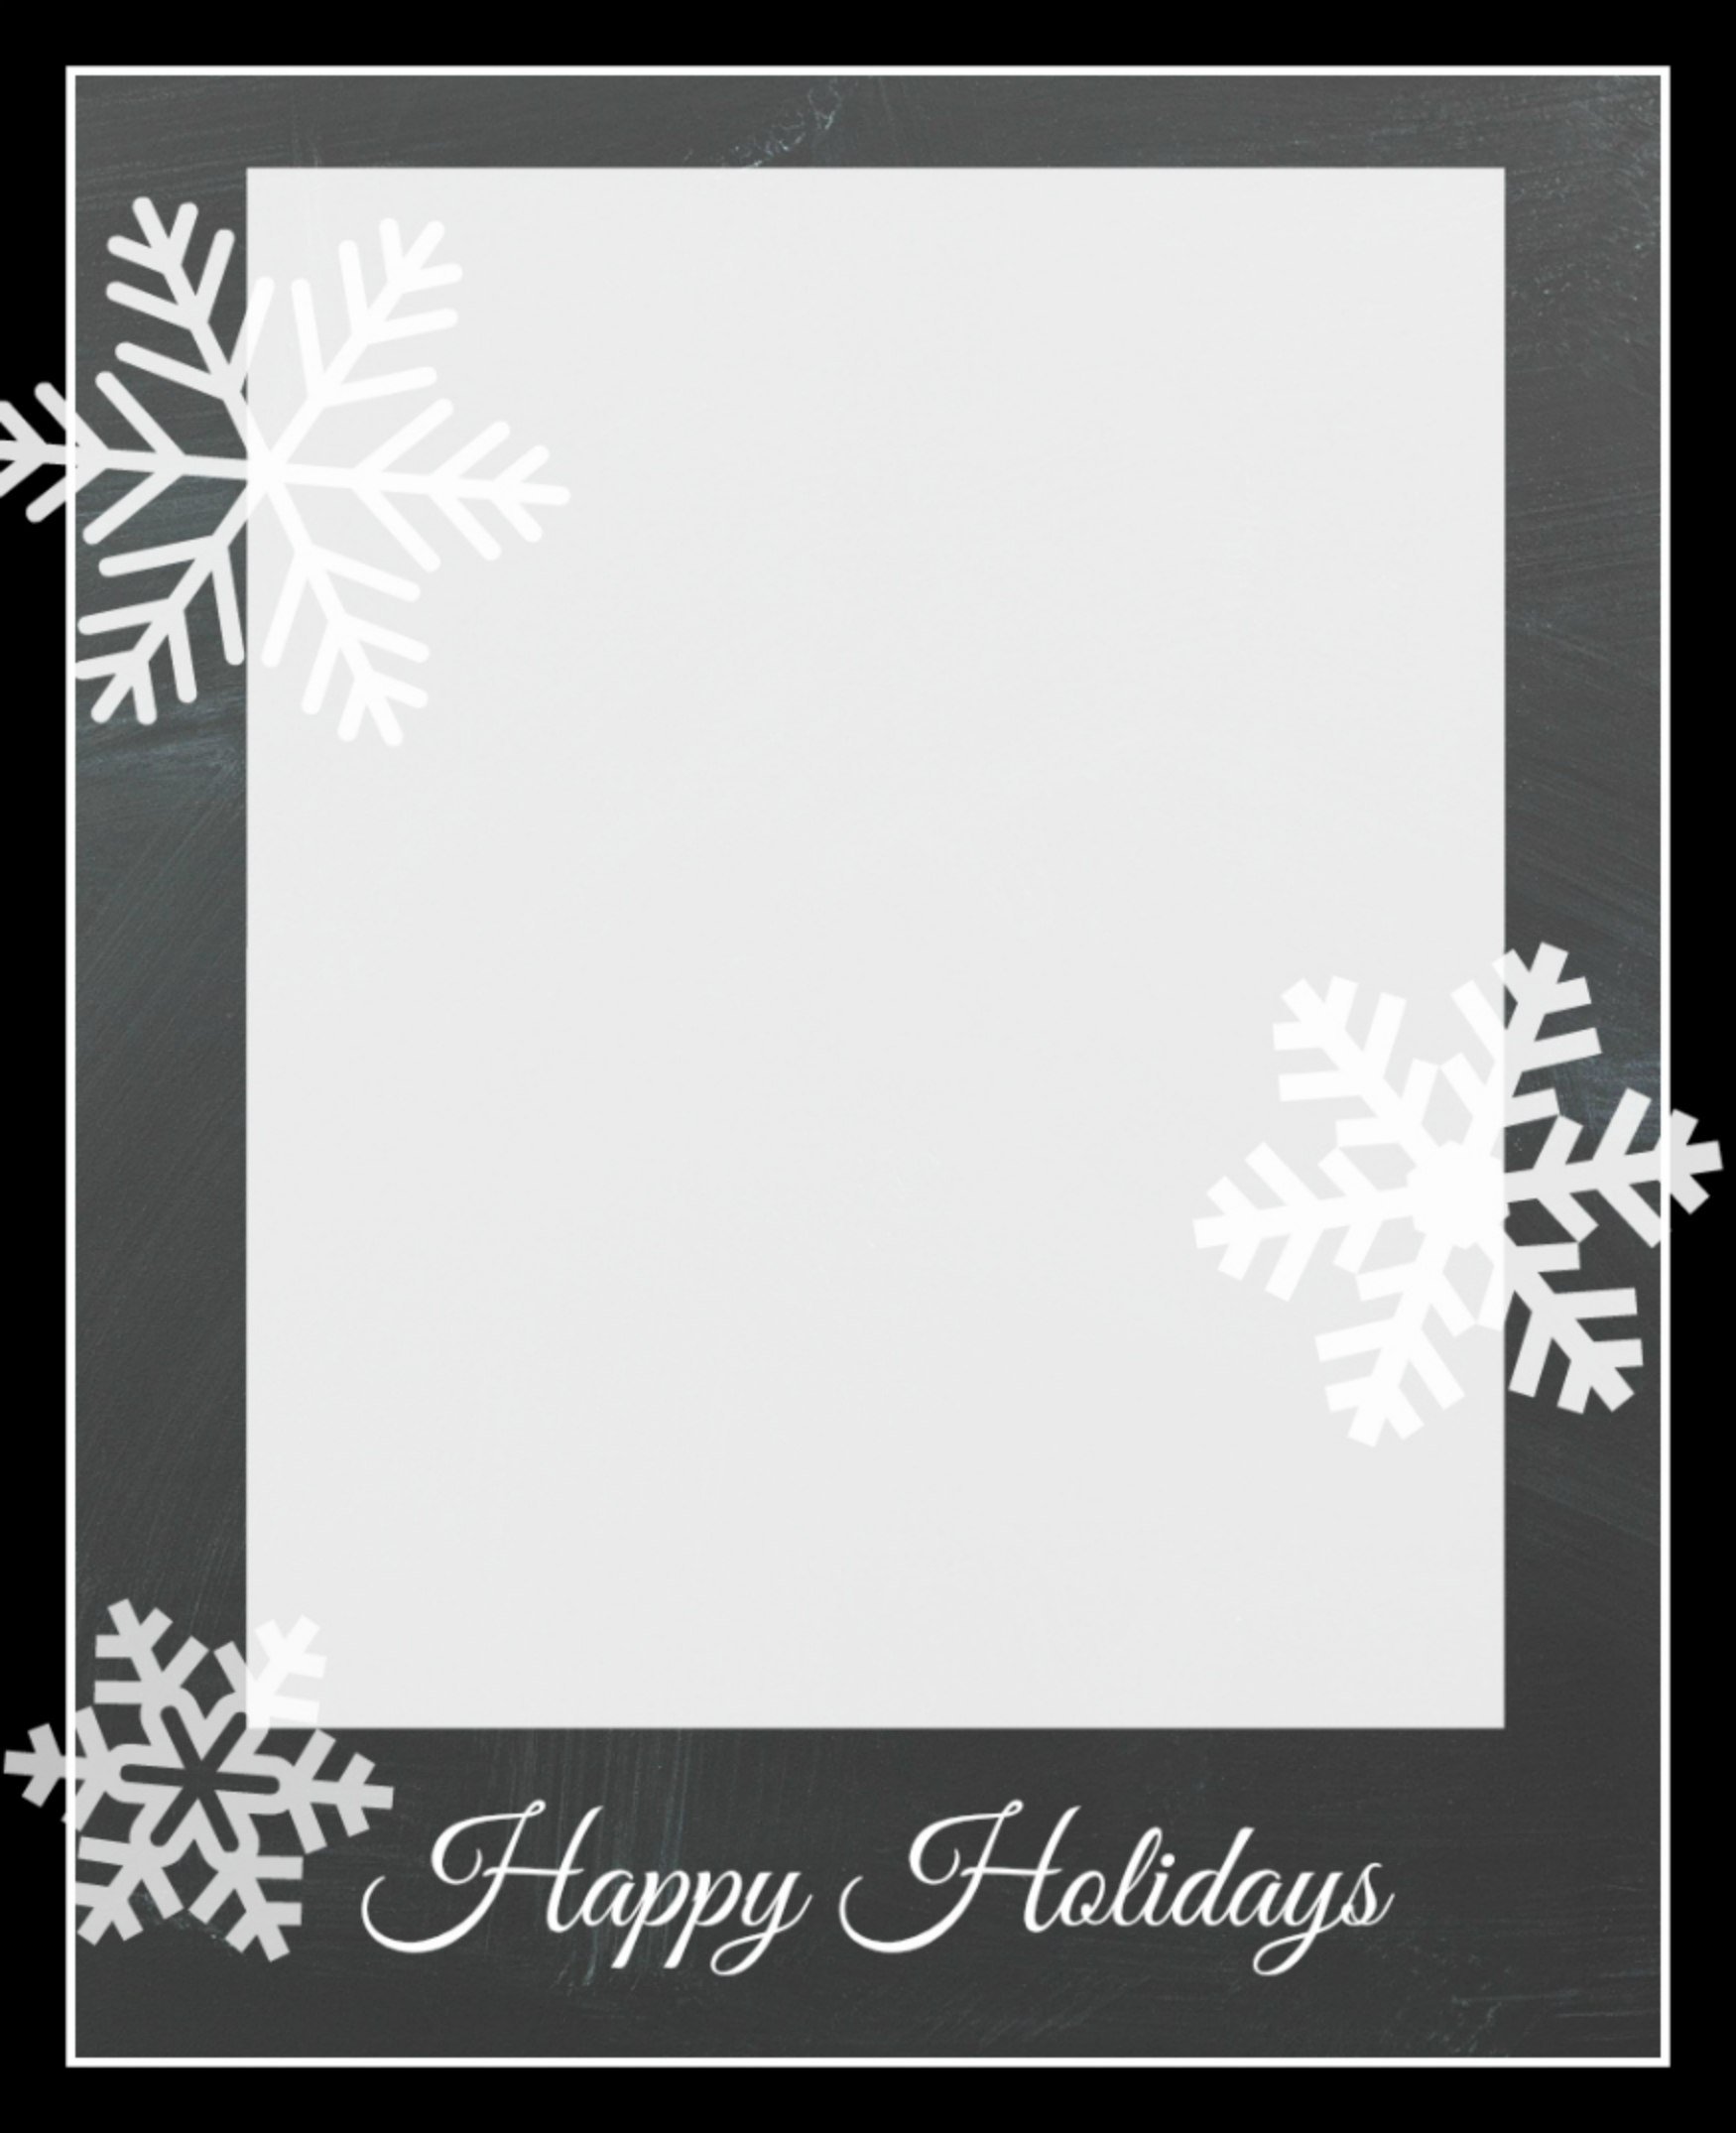 Free Christmas Card Templates  Crazy Little Projects with Happy Holidays Card Template